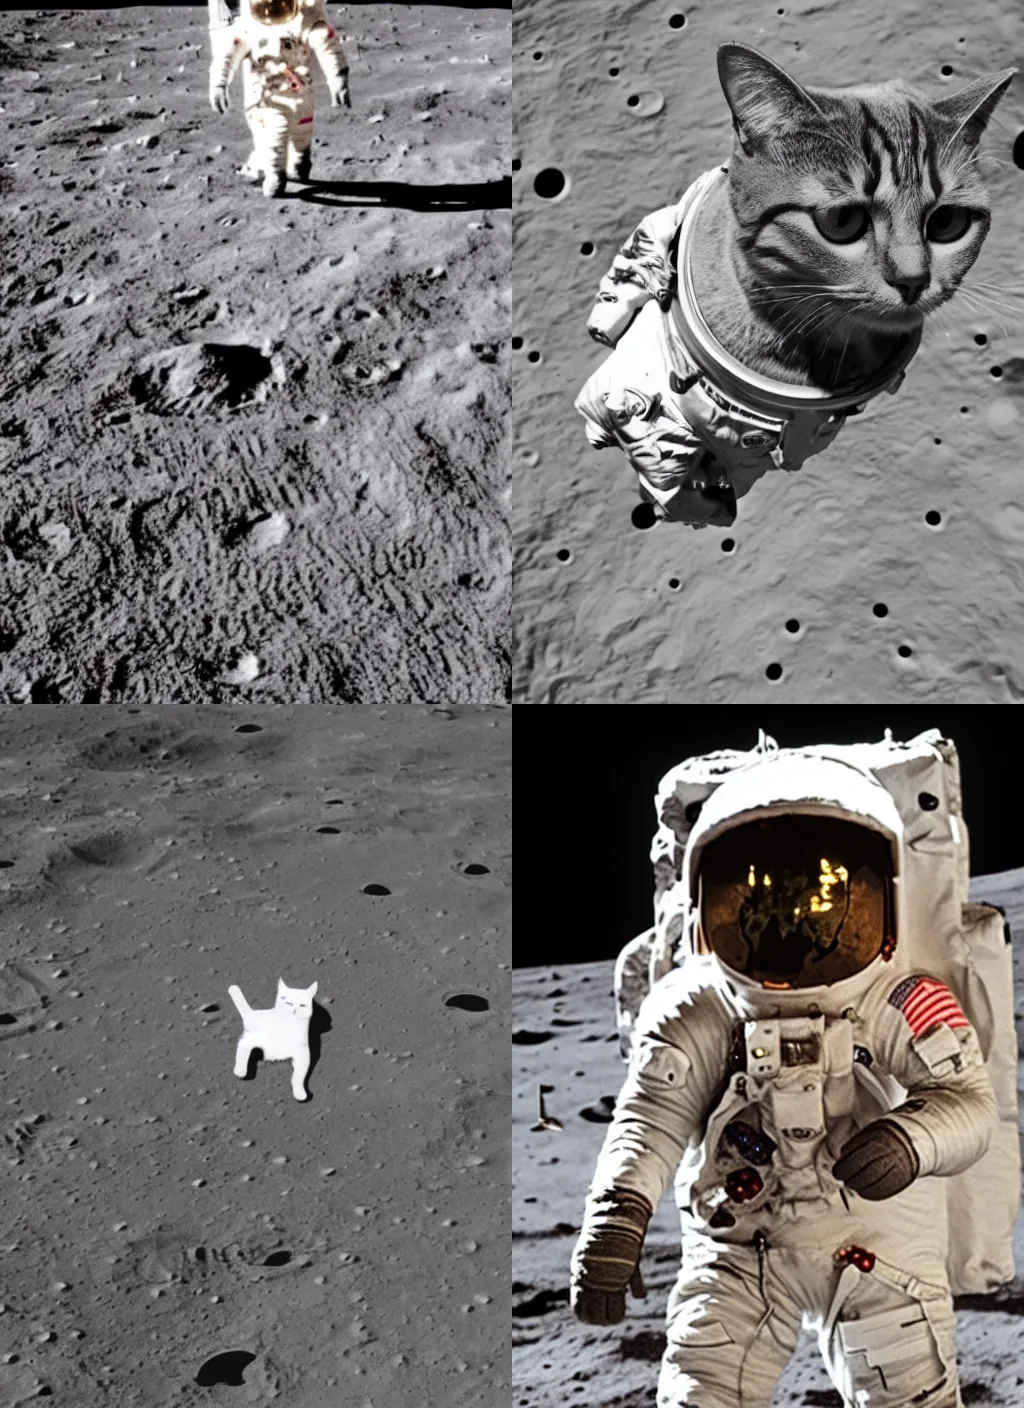 Prompt: A cat wearing a spacesuit on the moon.